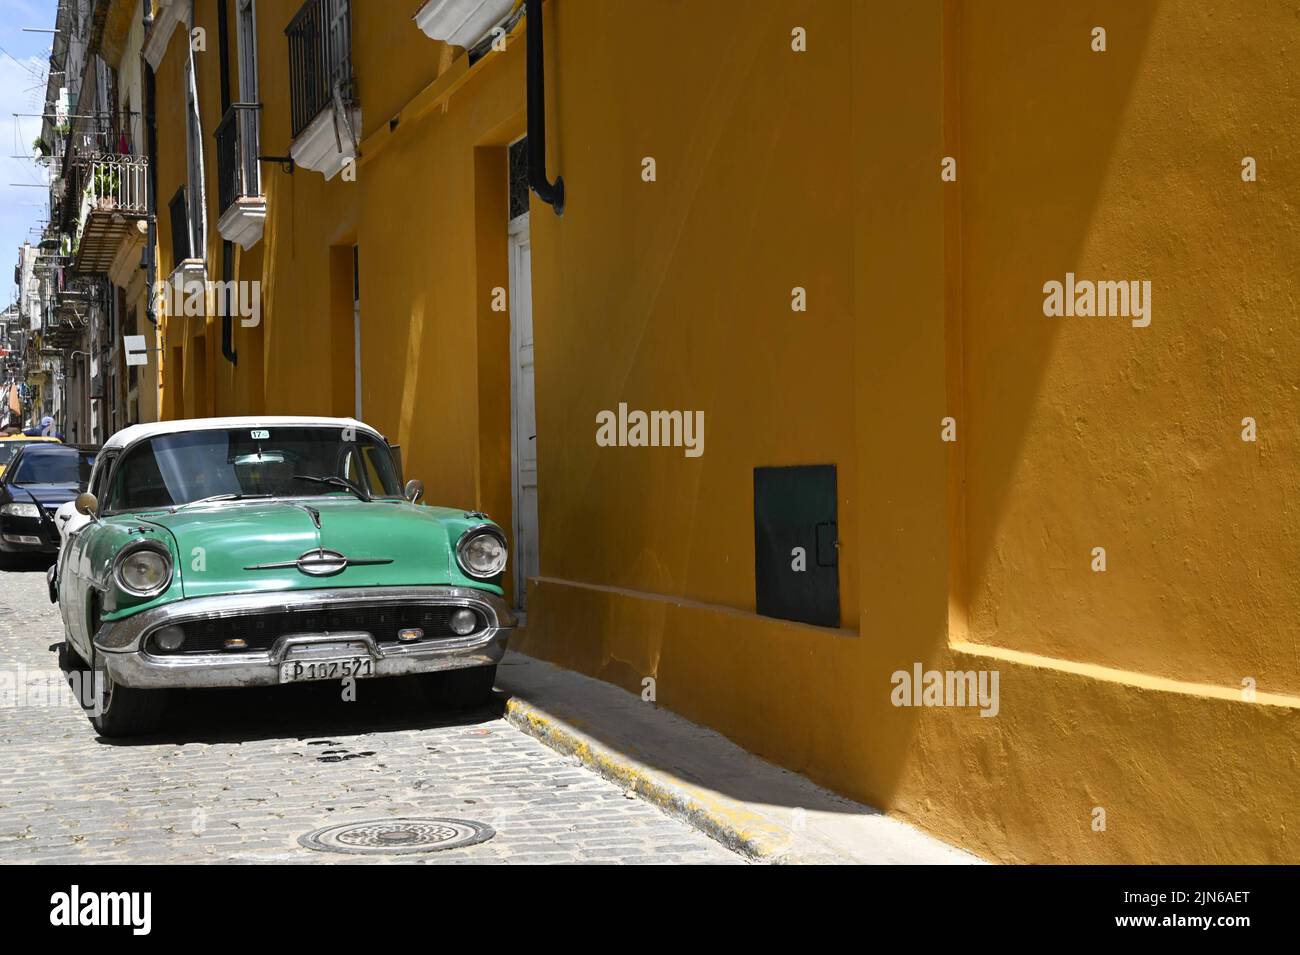 Scenic view of a vintage 1955 green and white Oldsmobile Holiday Deluxe sedan antique car in the historic center of Havana, Cuba. Stock Photo